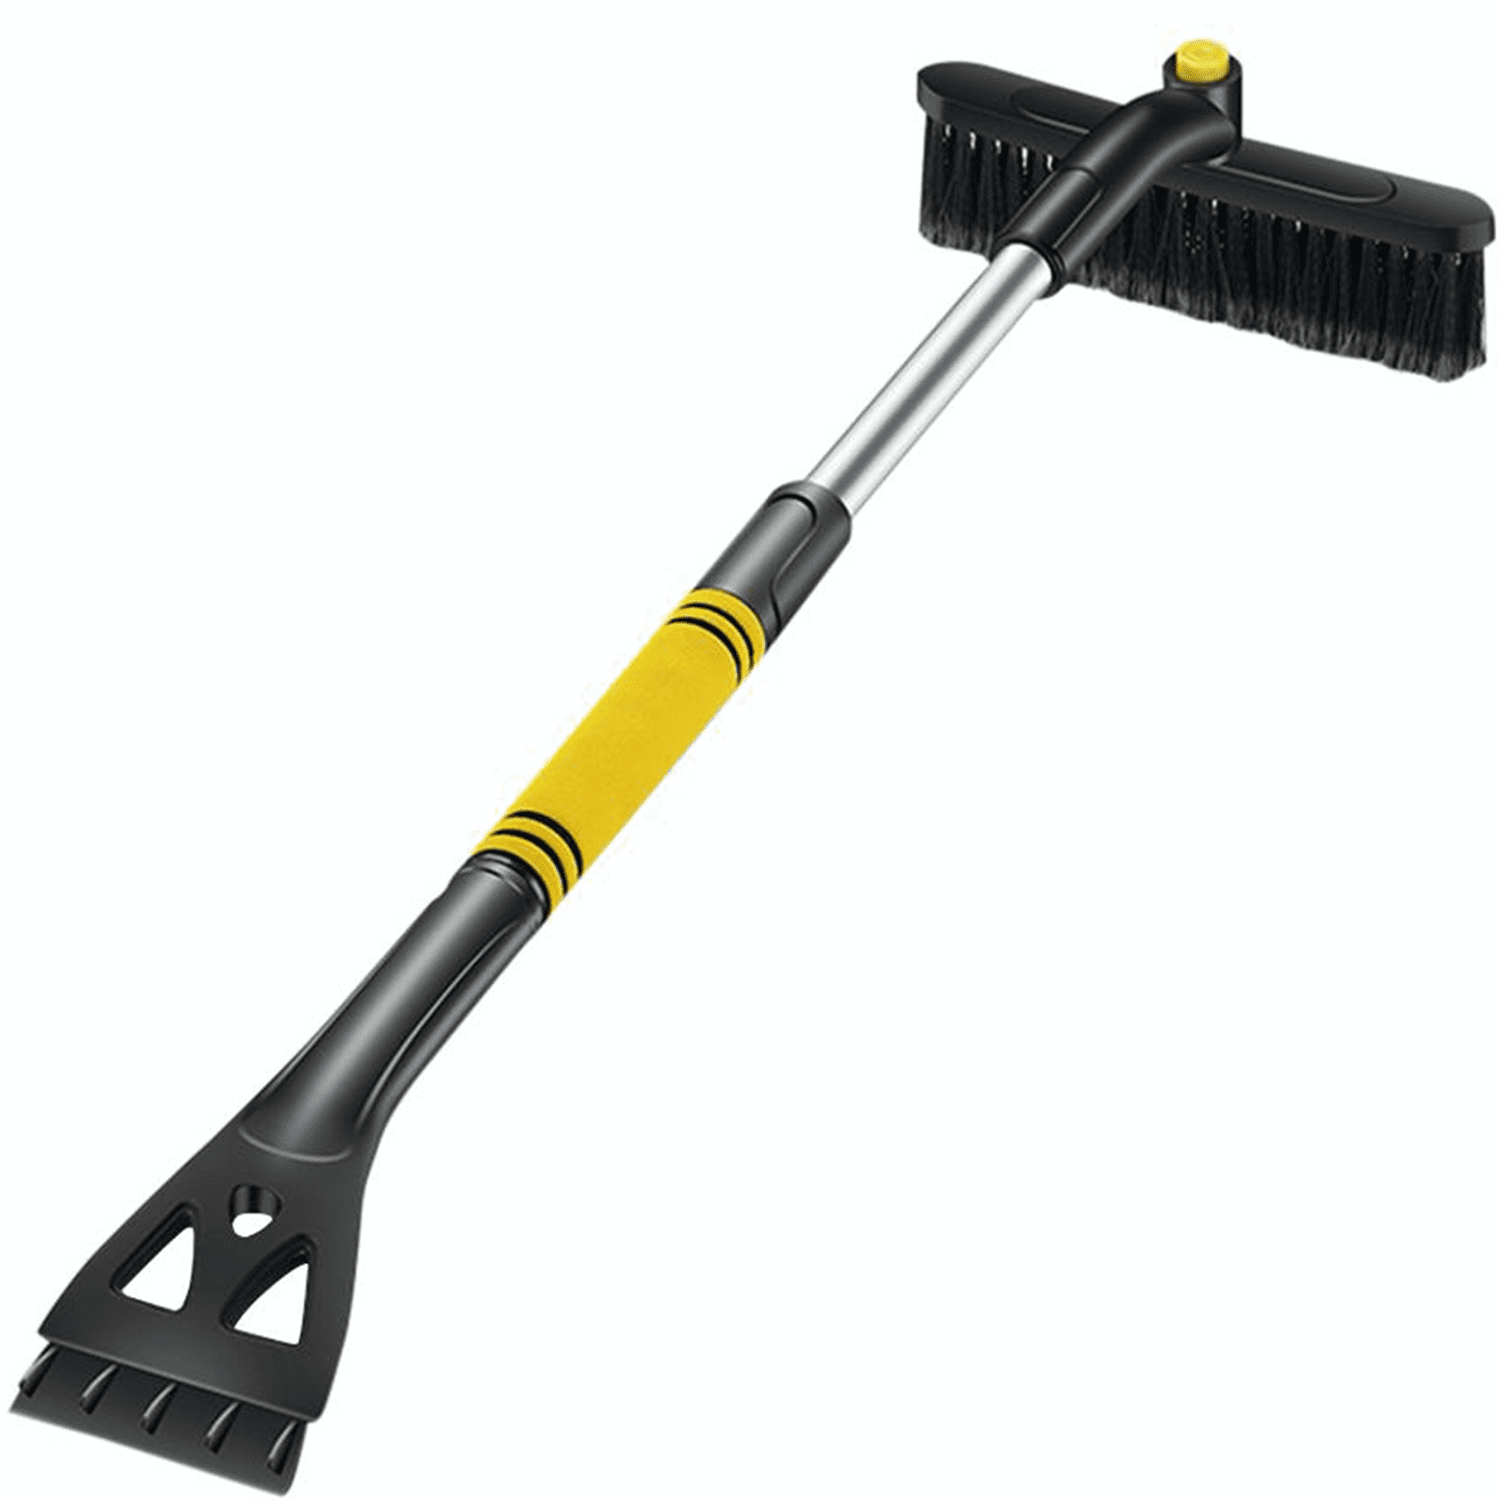 Ice Shovel Snow Scraper For Car Clean Removal Window Brush Broom Windshield Tool 